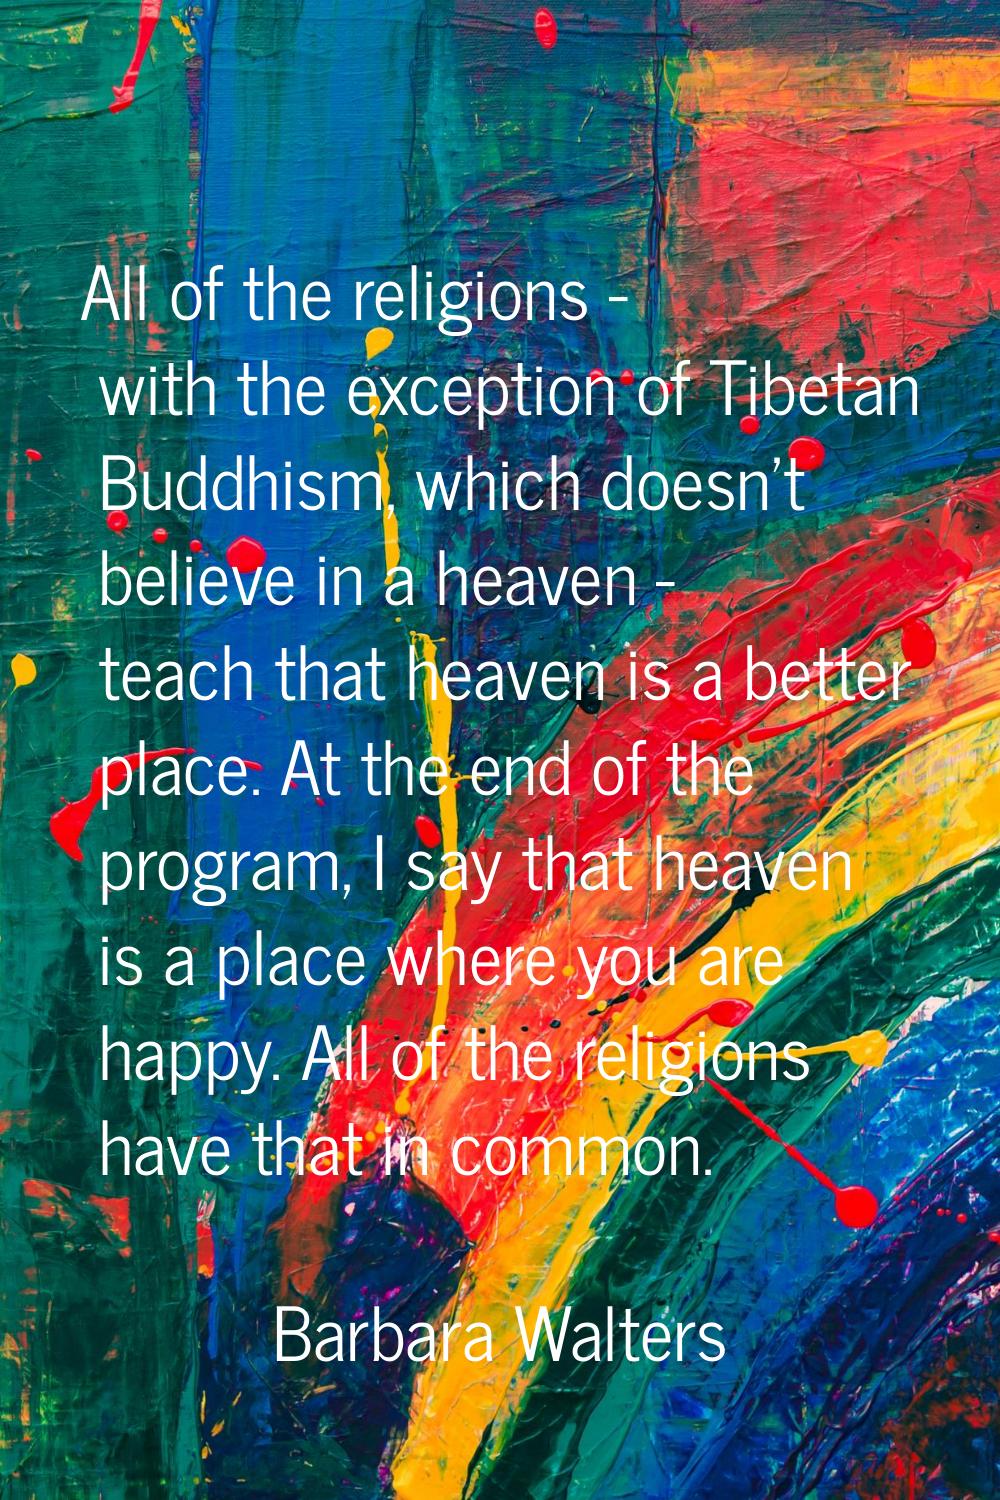 All of the religions - with the exception of Tibetan Buddhism, which doesn't believe in a heaven - 